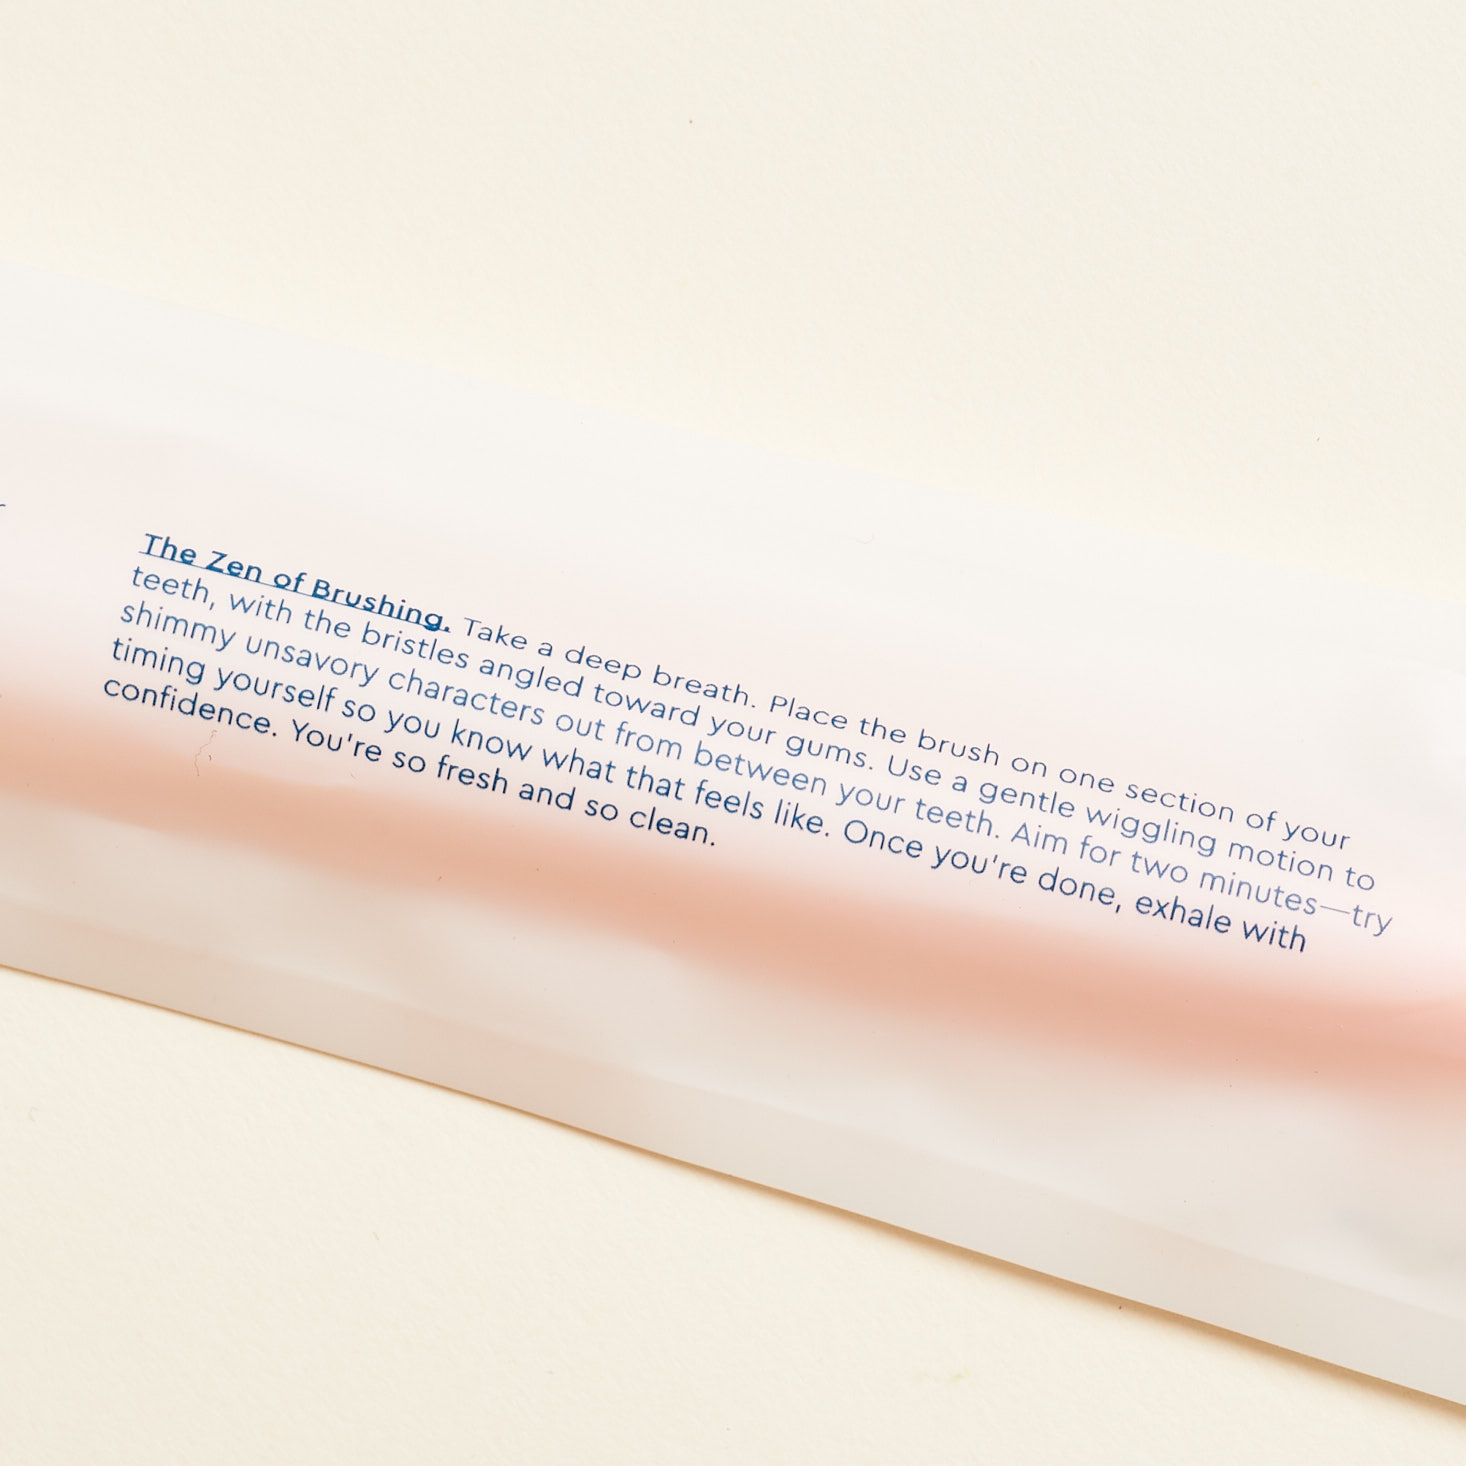 more toothbrush info on the packaging